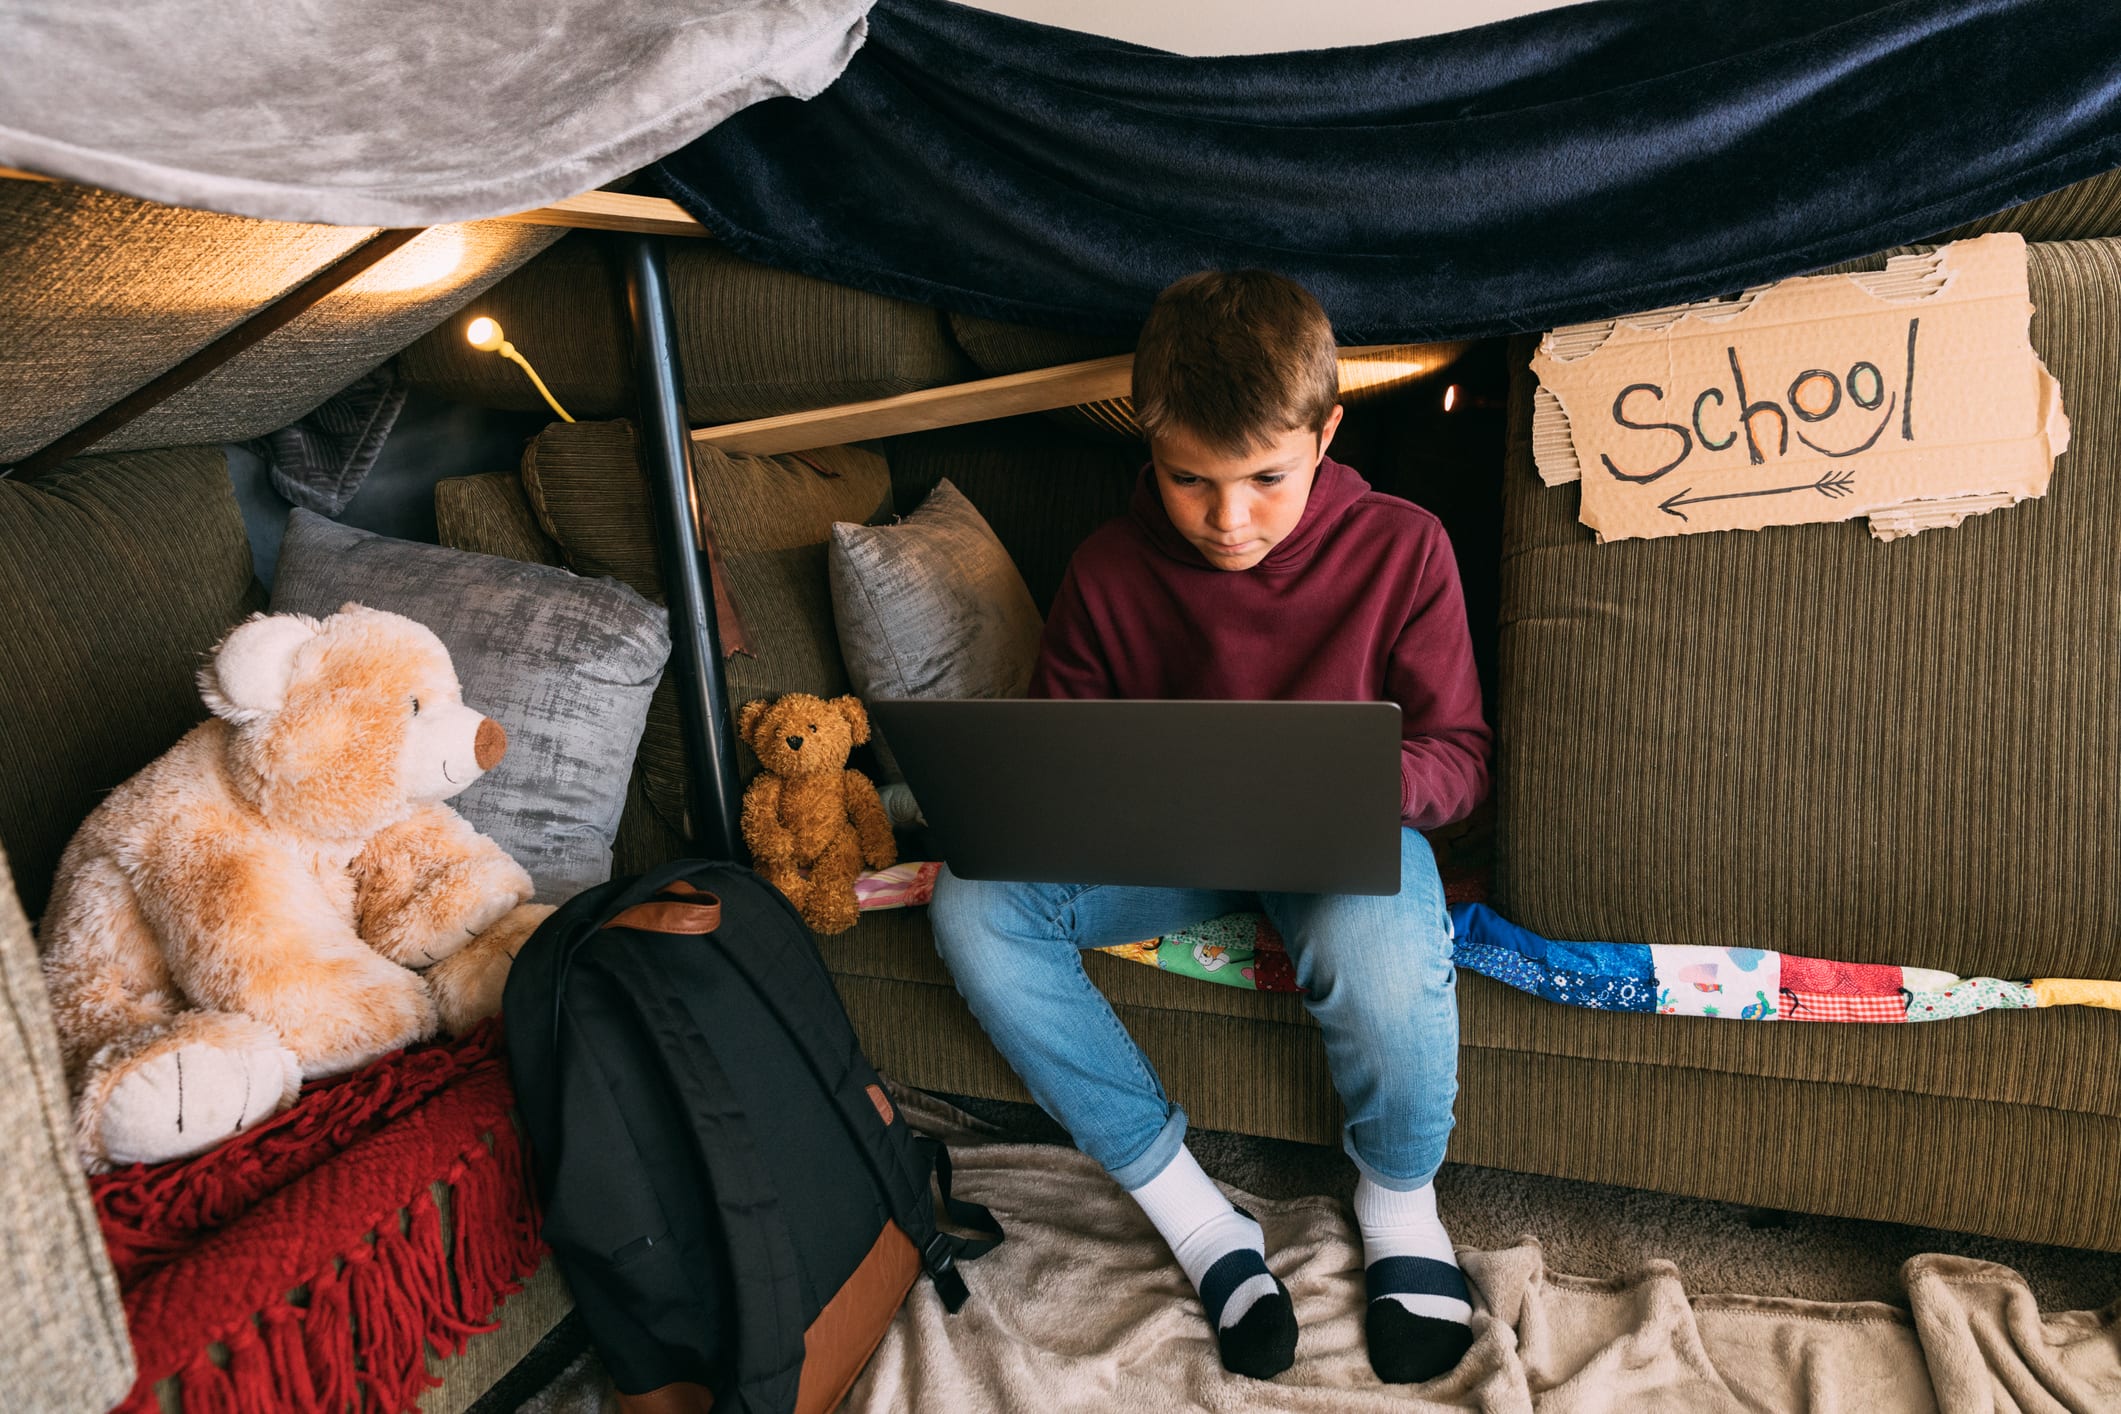 A young boy is working on his schooling and homework on a laptop from home. He sits inside a homemade couch fort trying his best to replicate his elementary education while at home during the coronavirus pandemic. Image taken in Utah, USA.